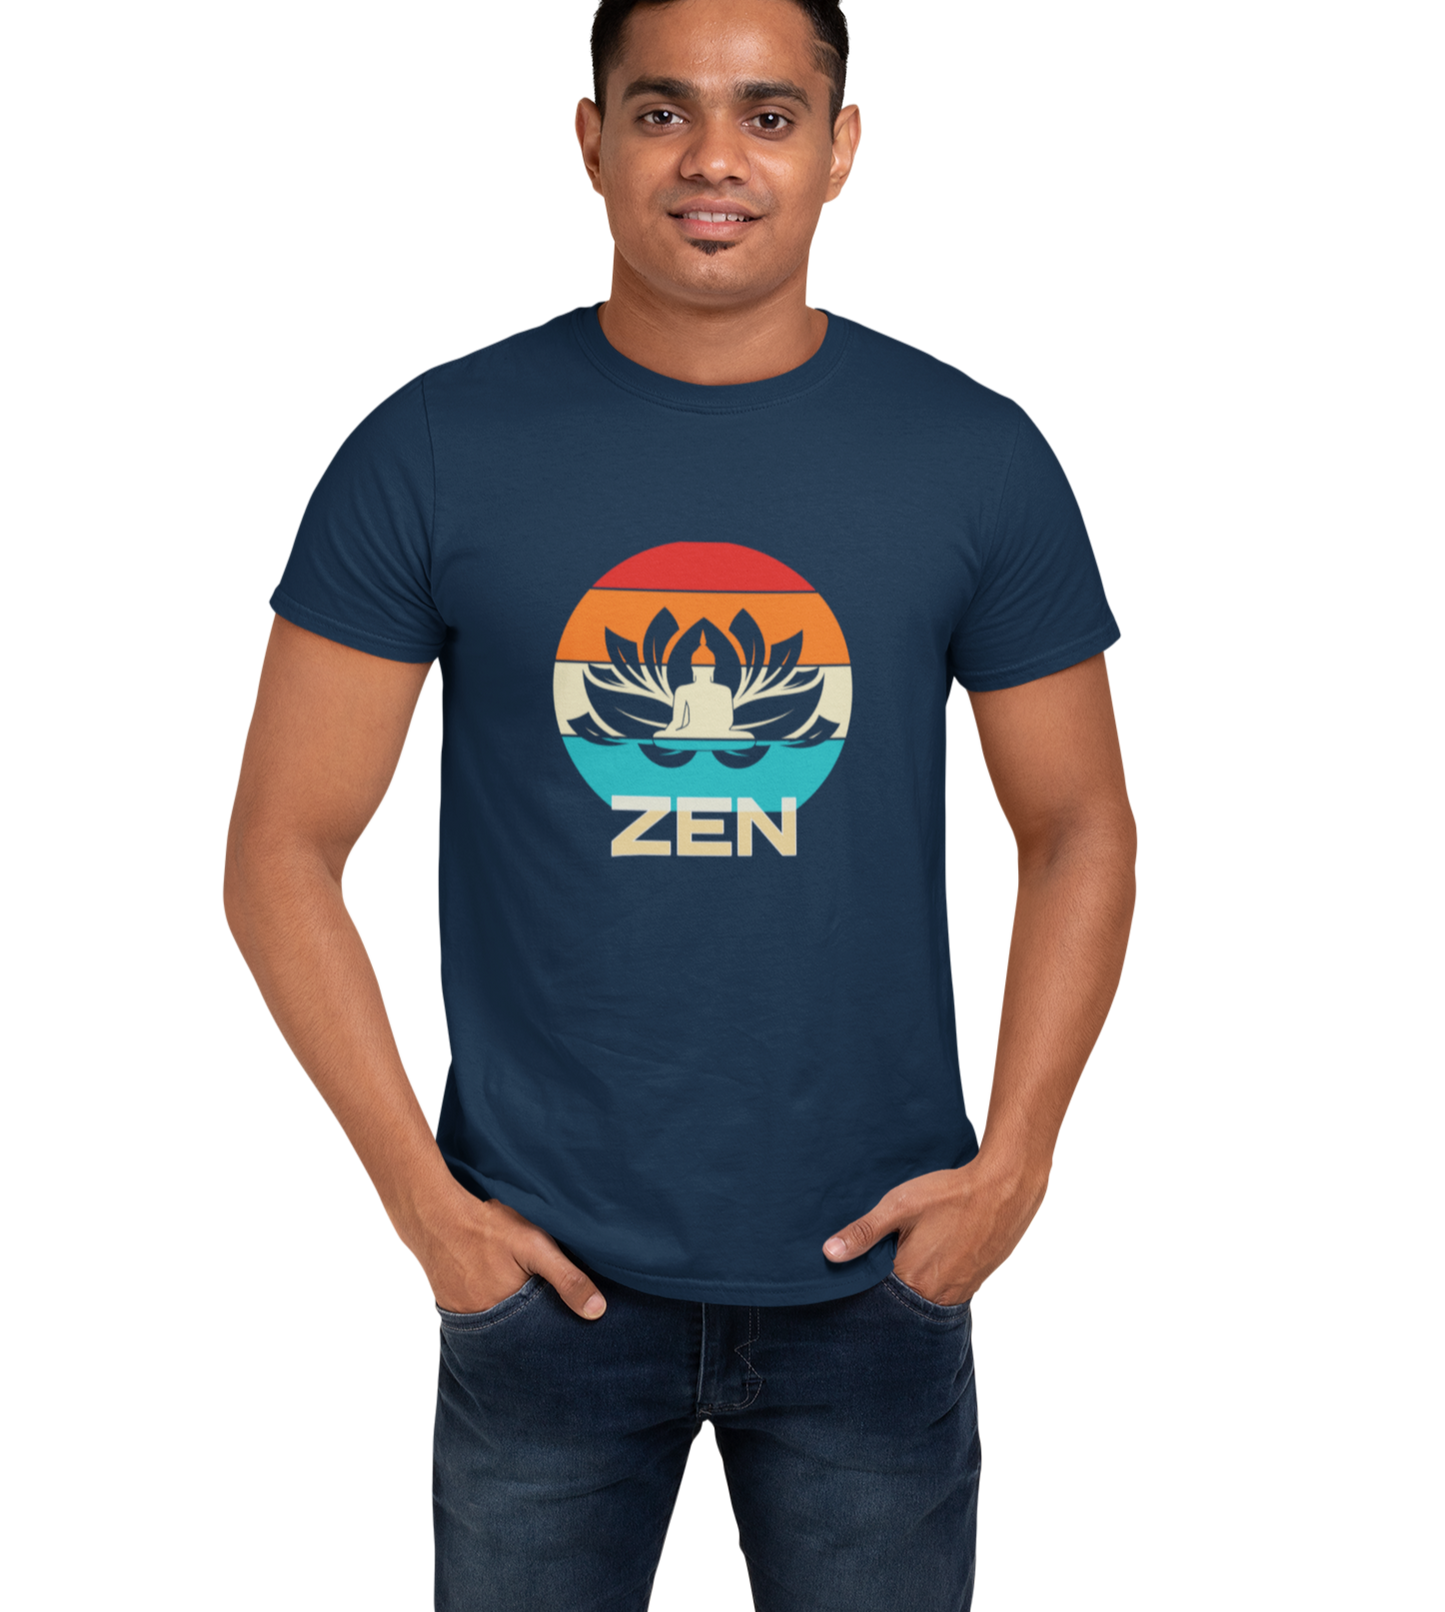 Yoga t-shirt for Men, Navy Blue color. printed with image of Buddha.